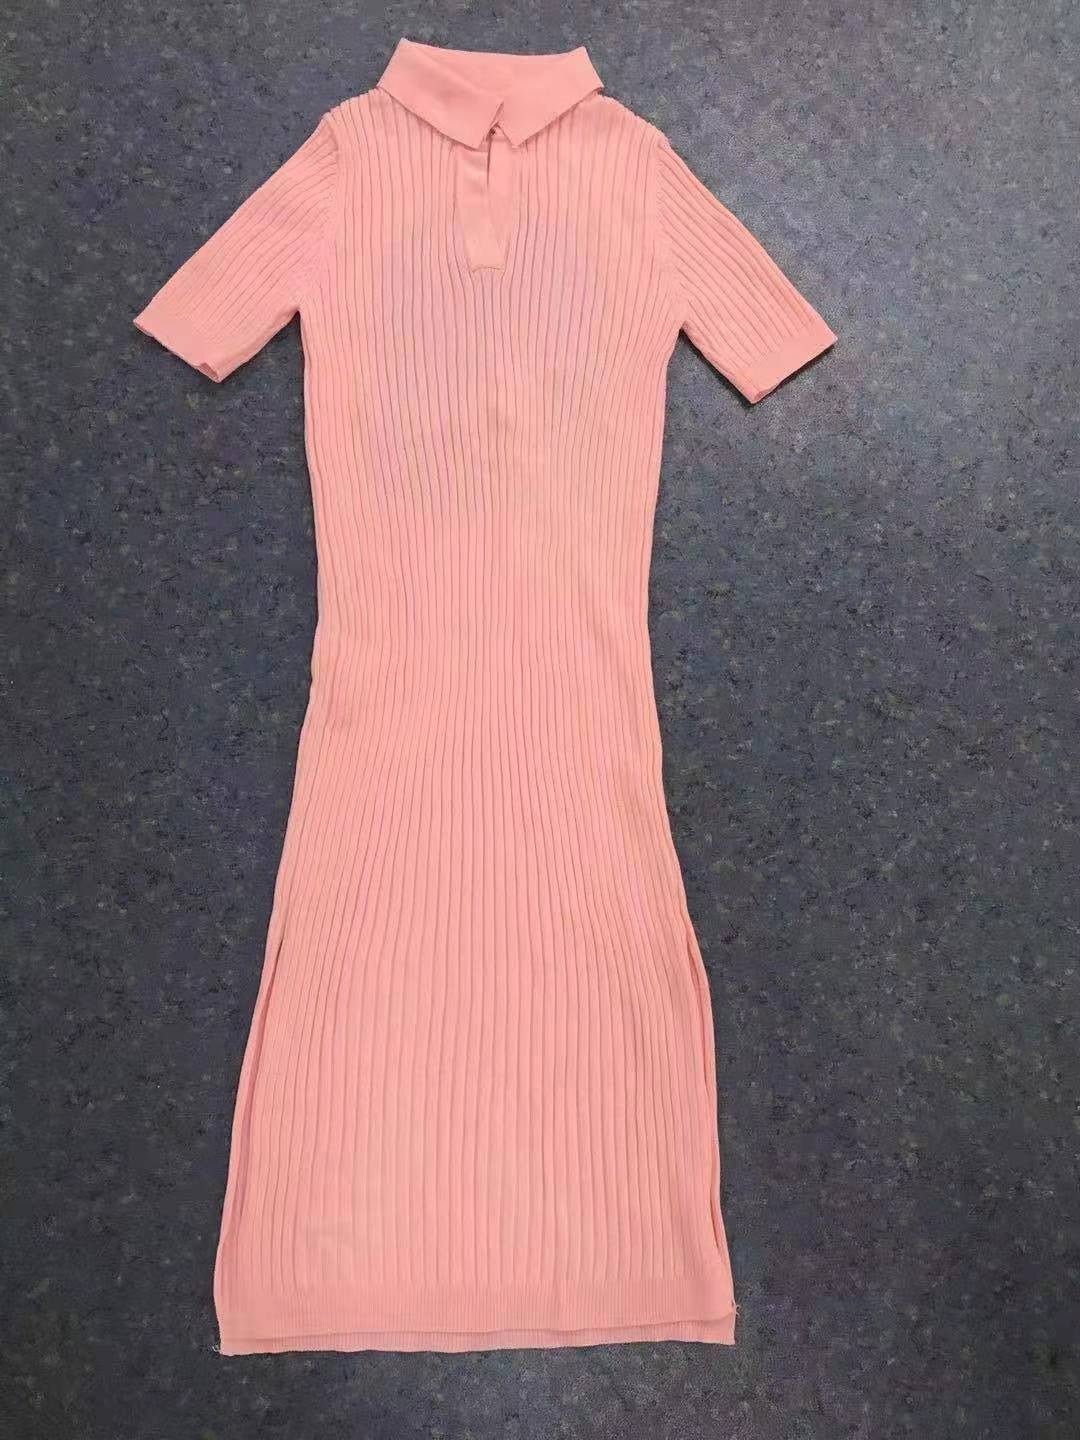 2021 New Women Summer Close-fitting Slit Dress Pink Solid Color Turn-down Collar Short Sleeve Backless Ribbed Knitted Dress